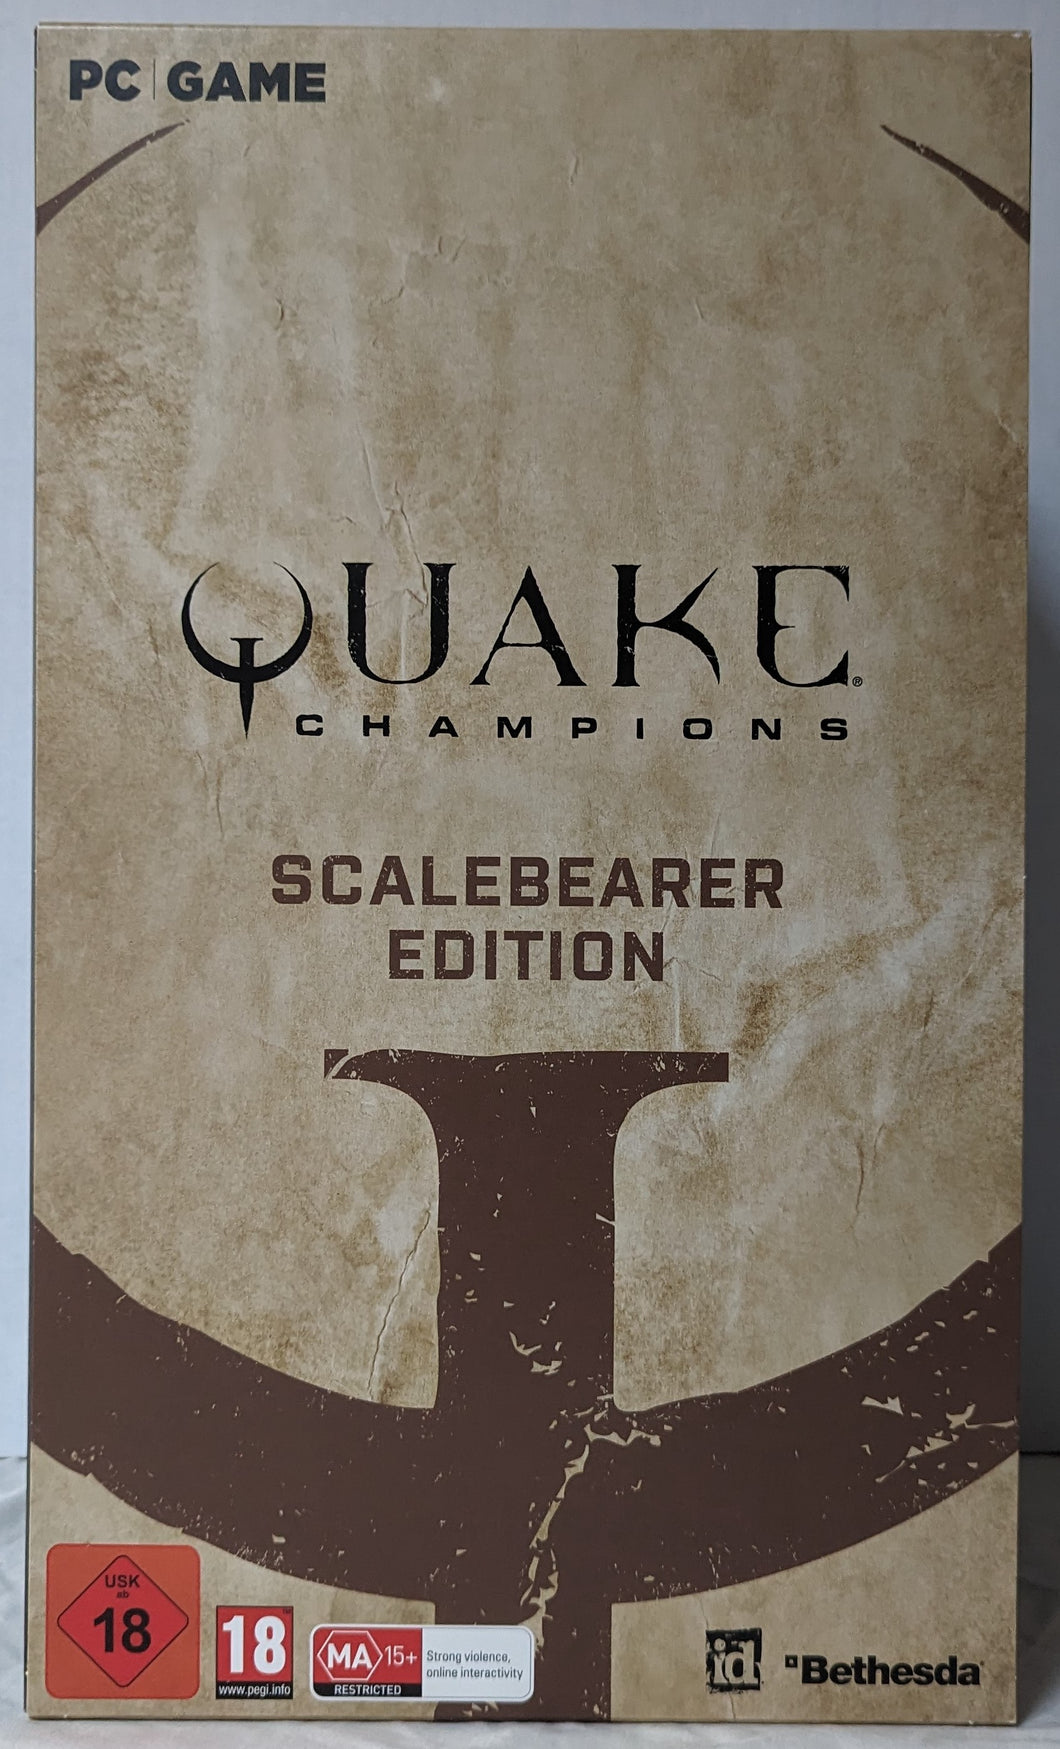 Quake Champions Scalebearer Edition PC Game and Statue